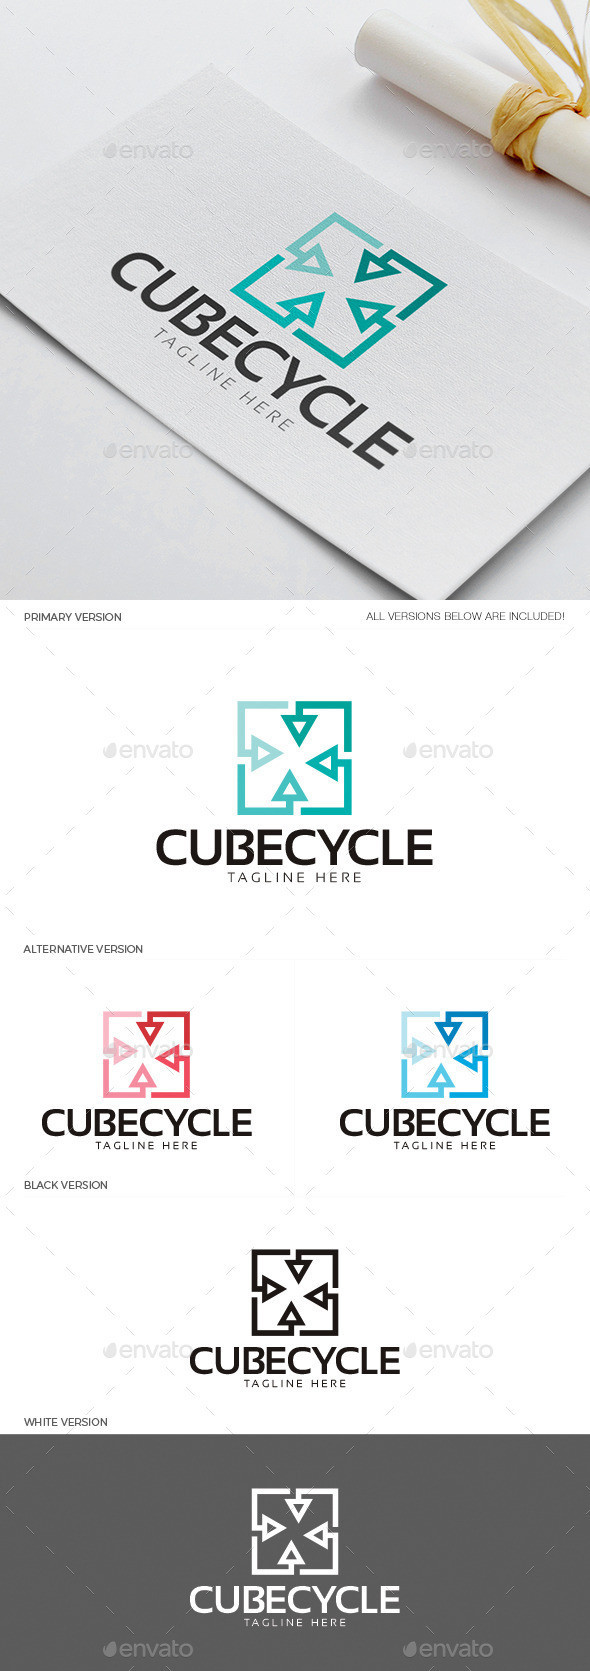 Cubecycle